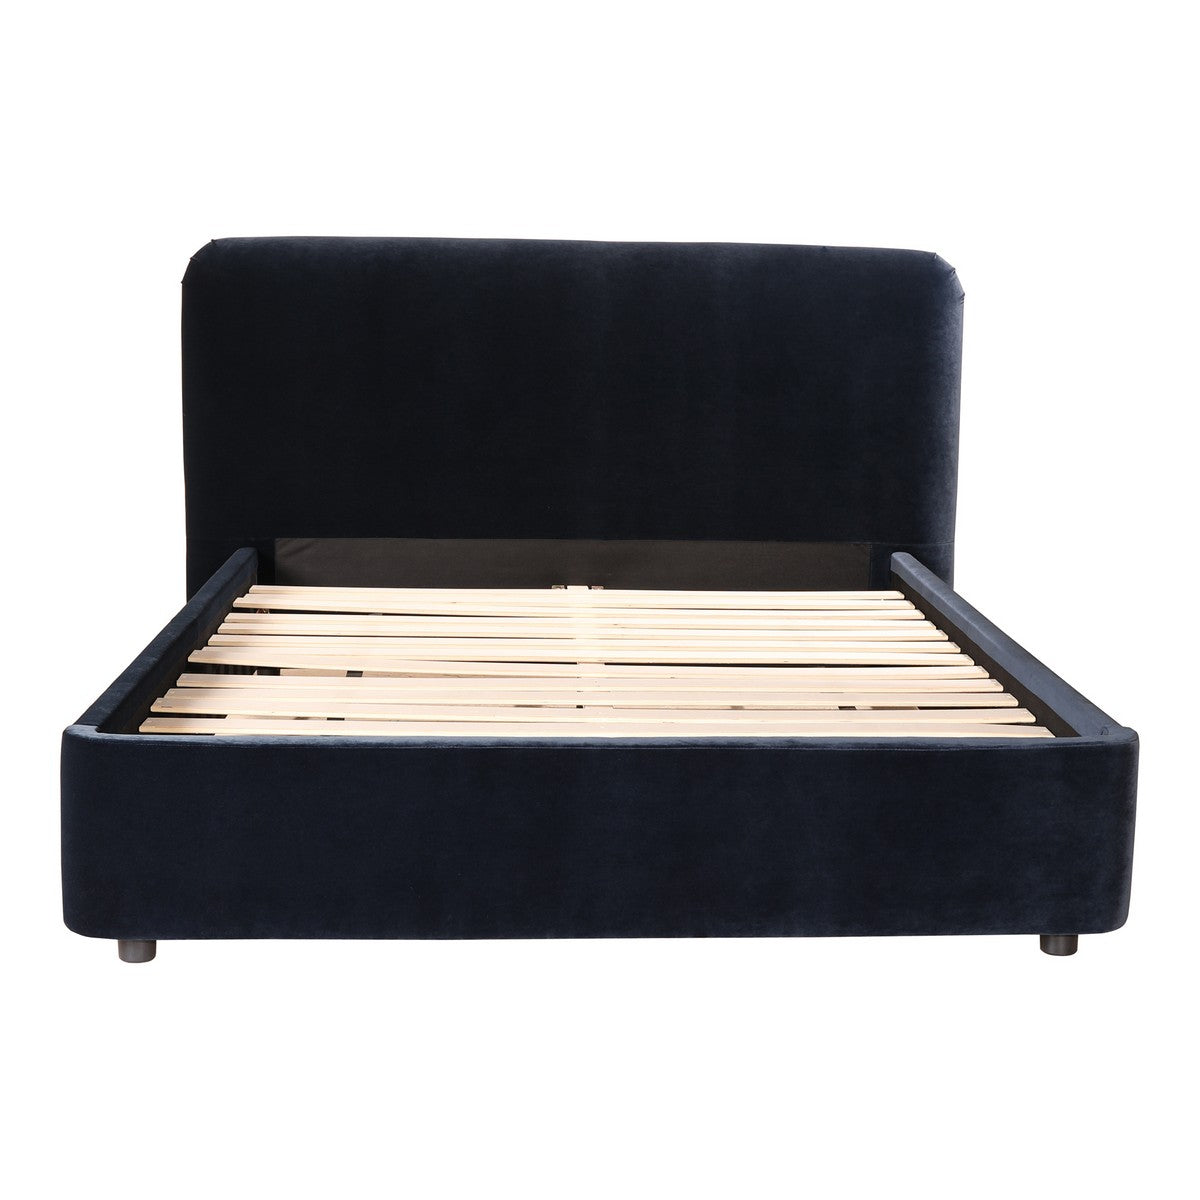 Moe's Home Collection Samara King Bed Blue Velvet - RN-1126-26 - Moe's Home Collection - Beds - Minimal And Modern - 1